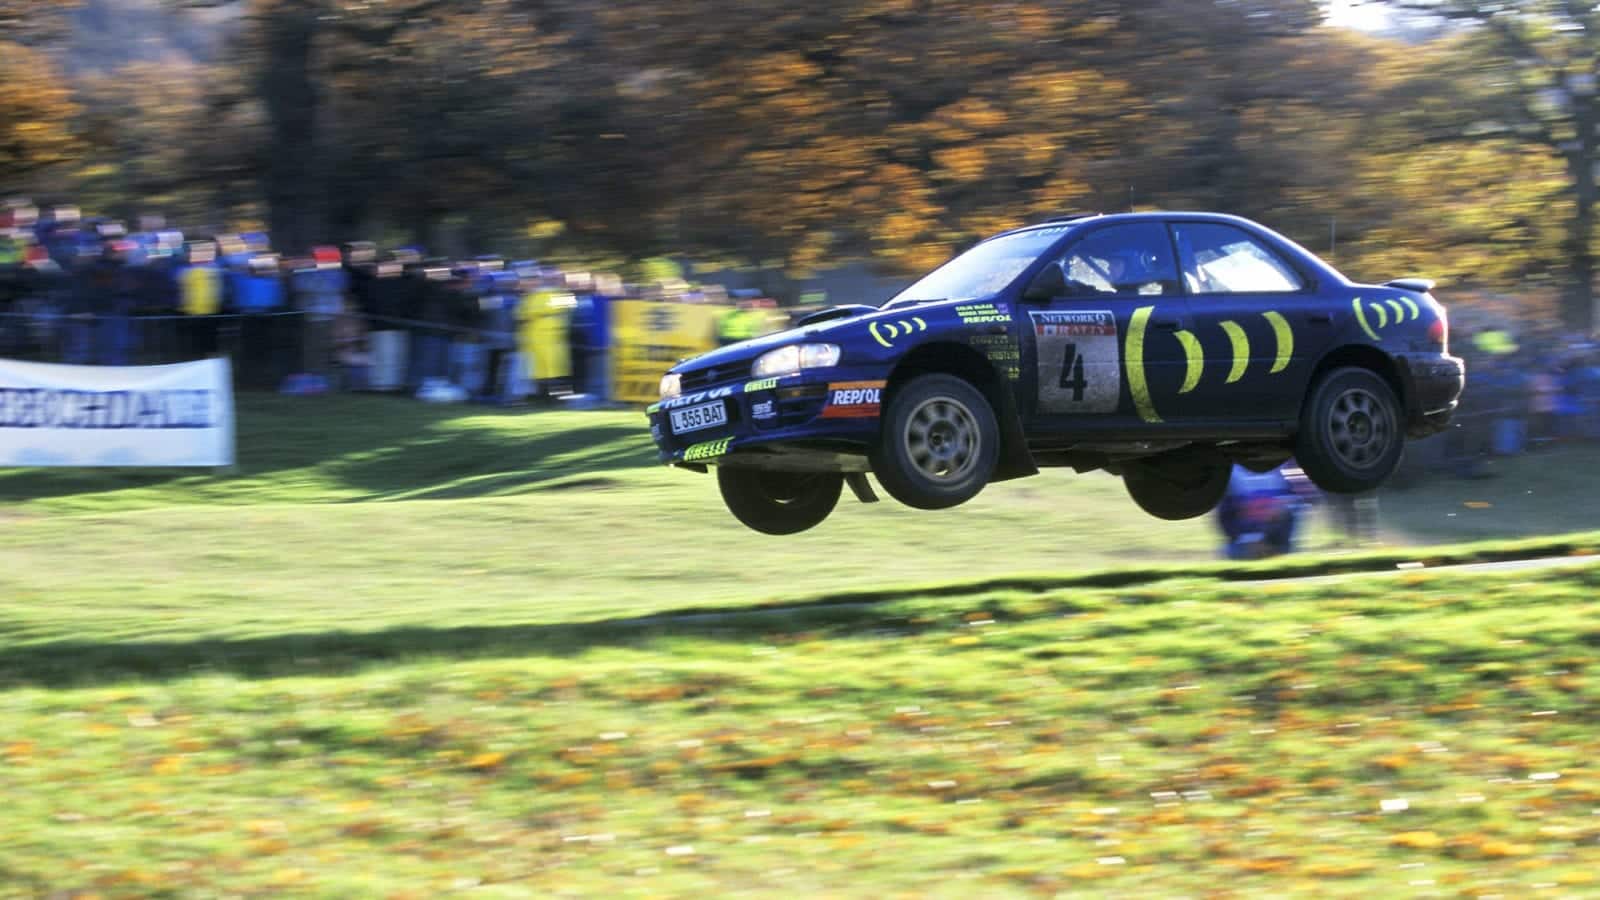 Subaru of Colin McRae in mid-air during the 1995 RAC Rally